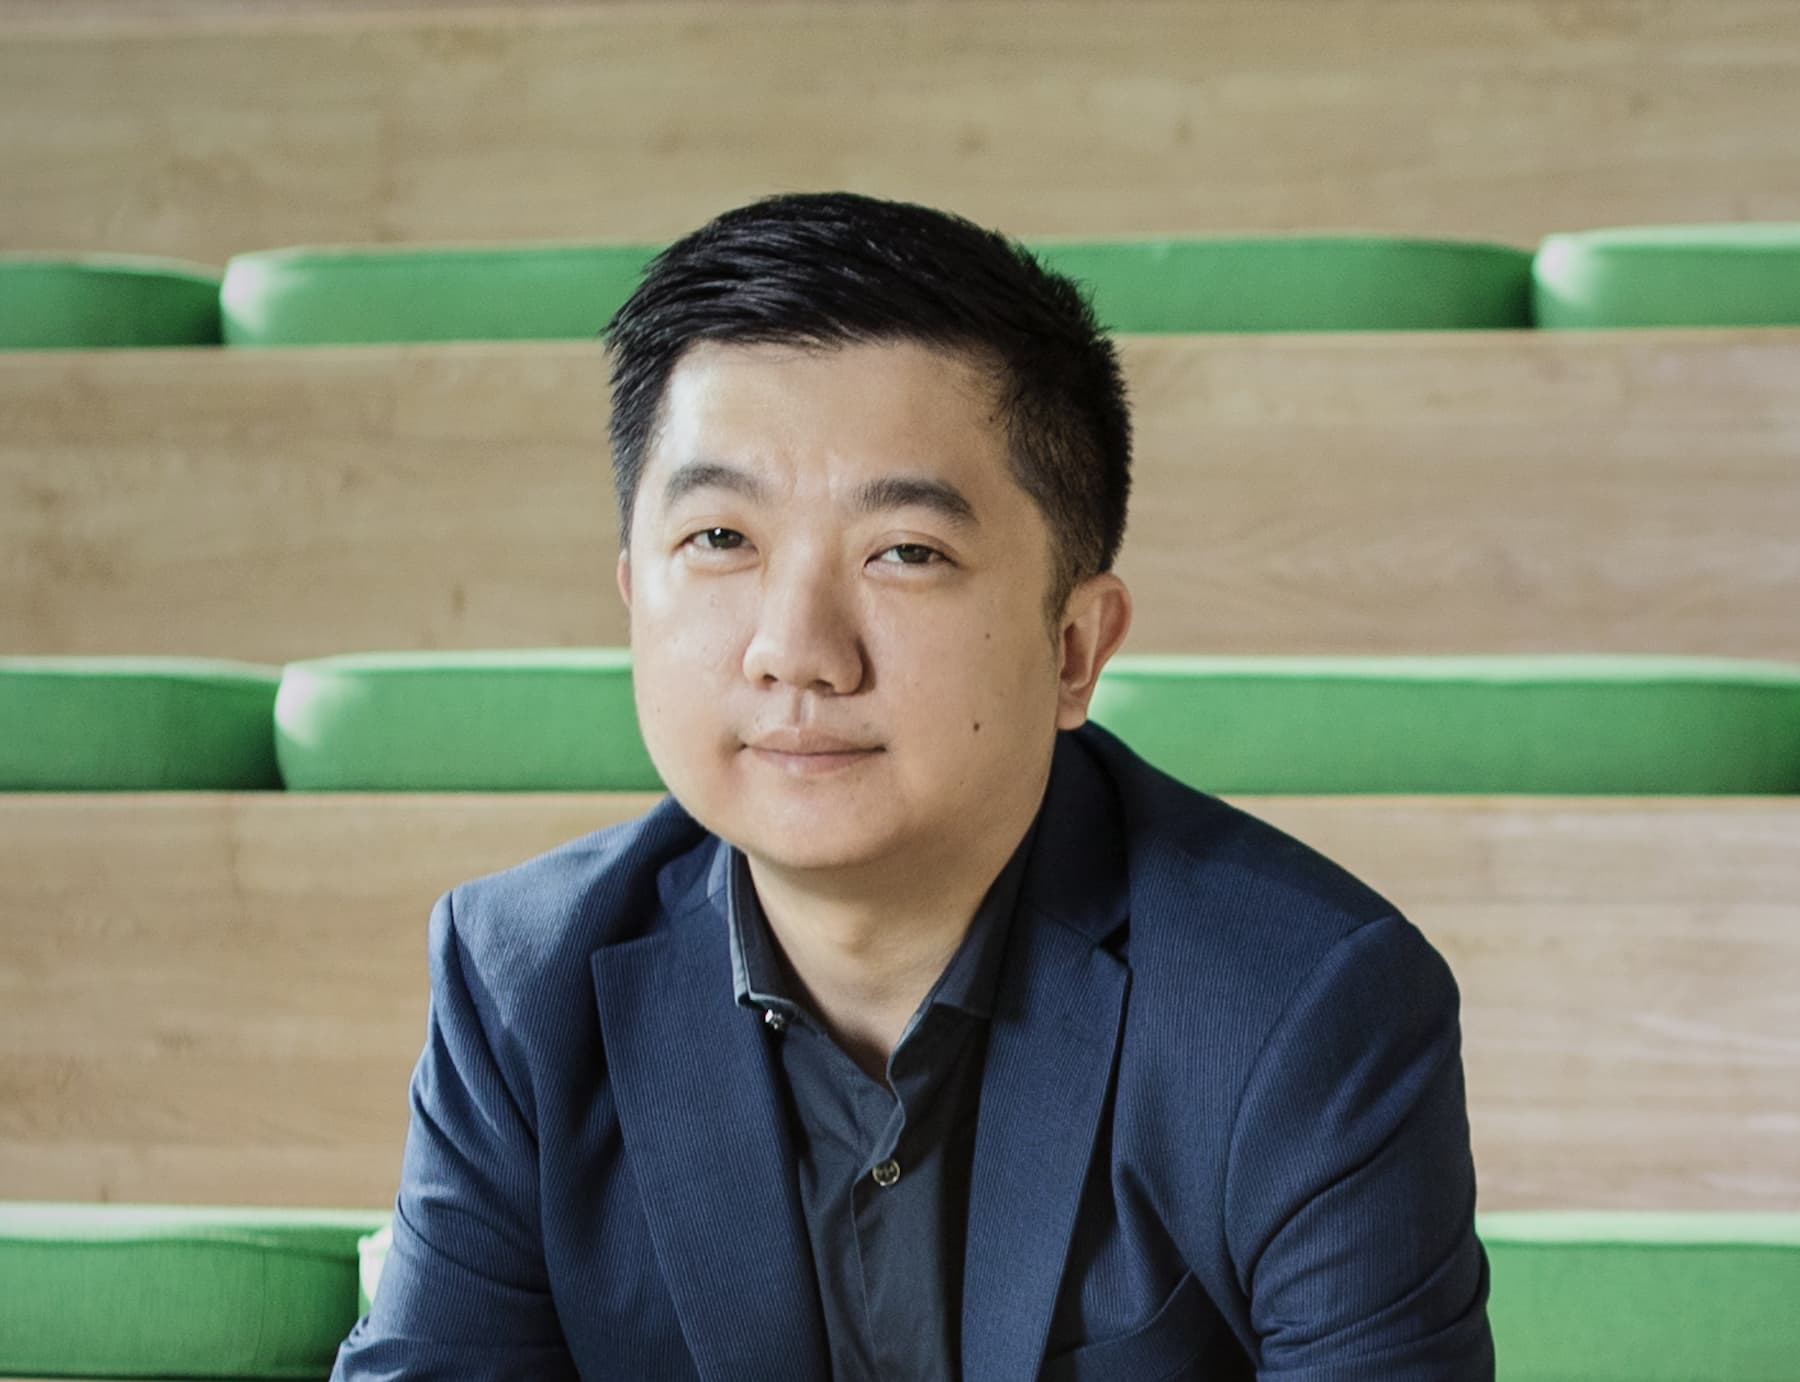 Tokopedia CEO defied critics to build a multibillion-dollar business - Verve times